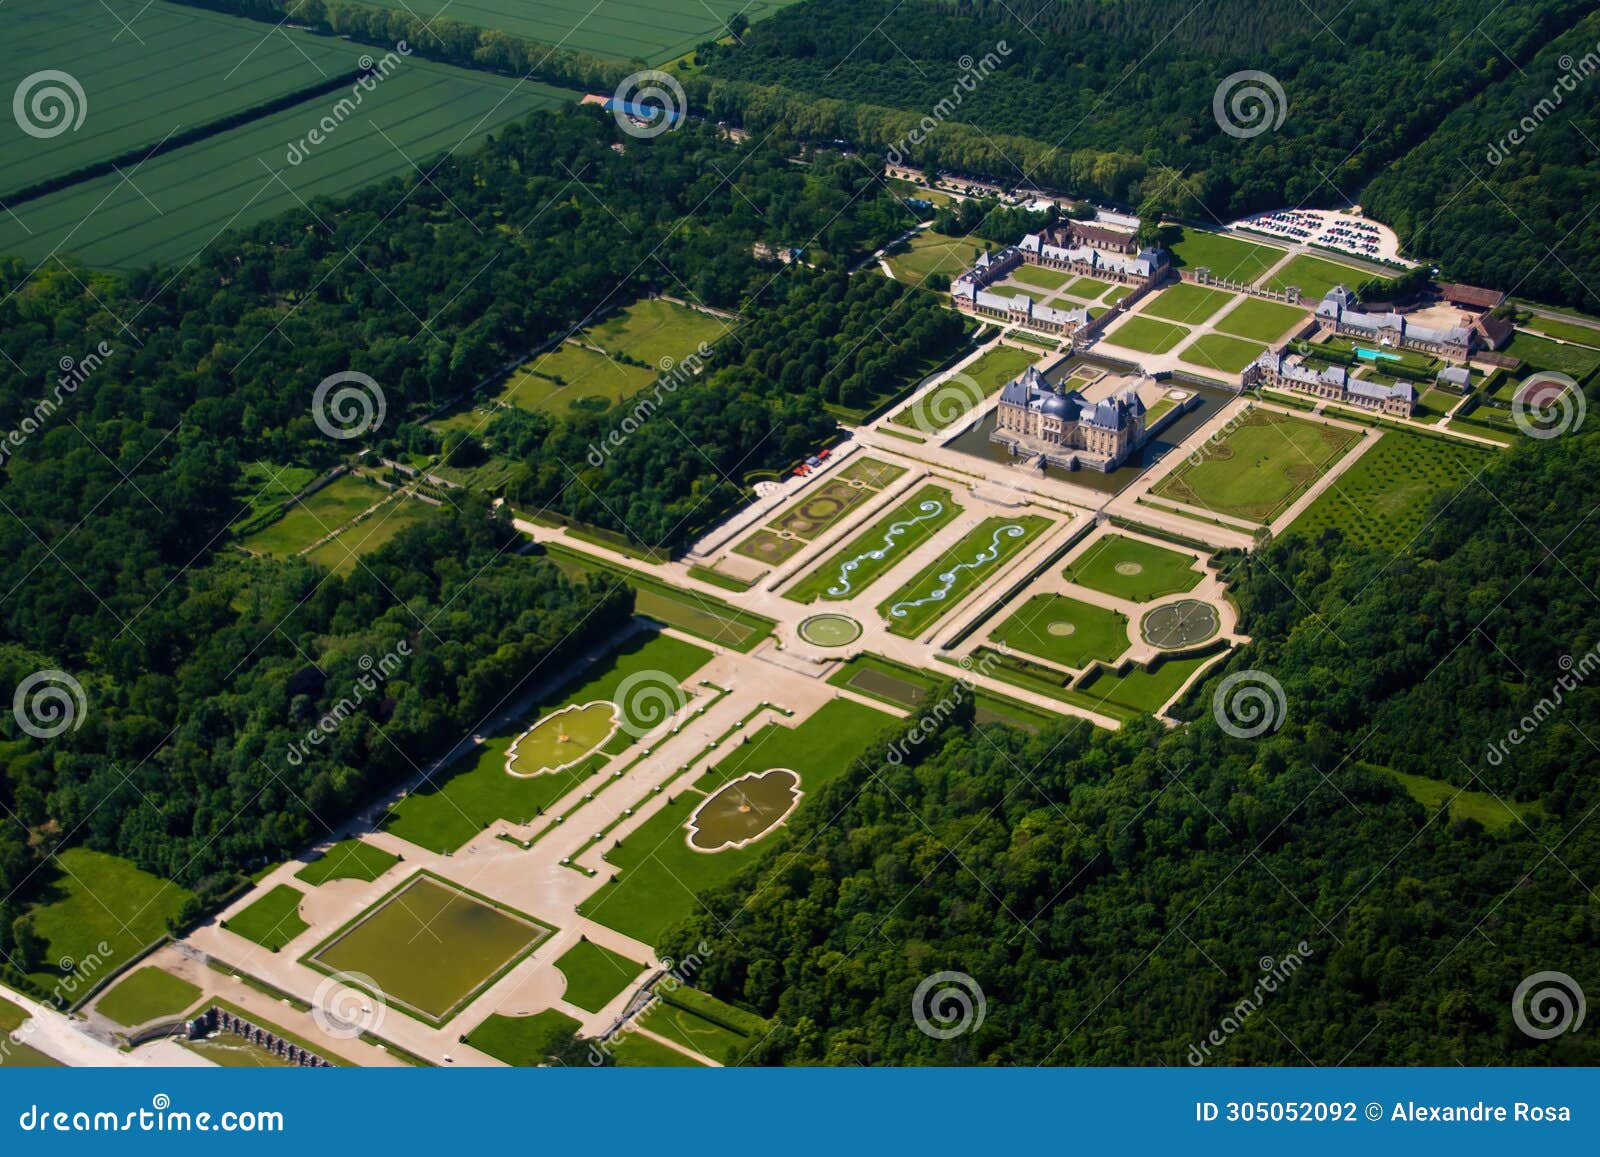 aerial view of the castle and gardens of vaux le vicomte near paris, france